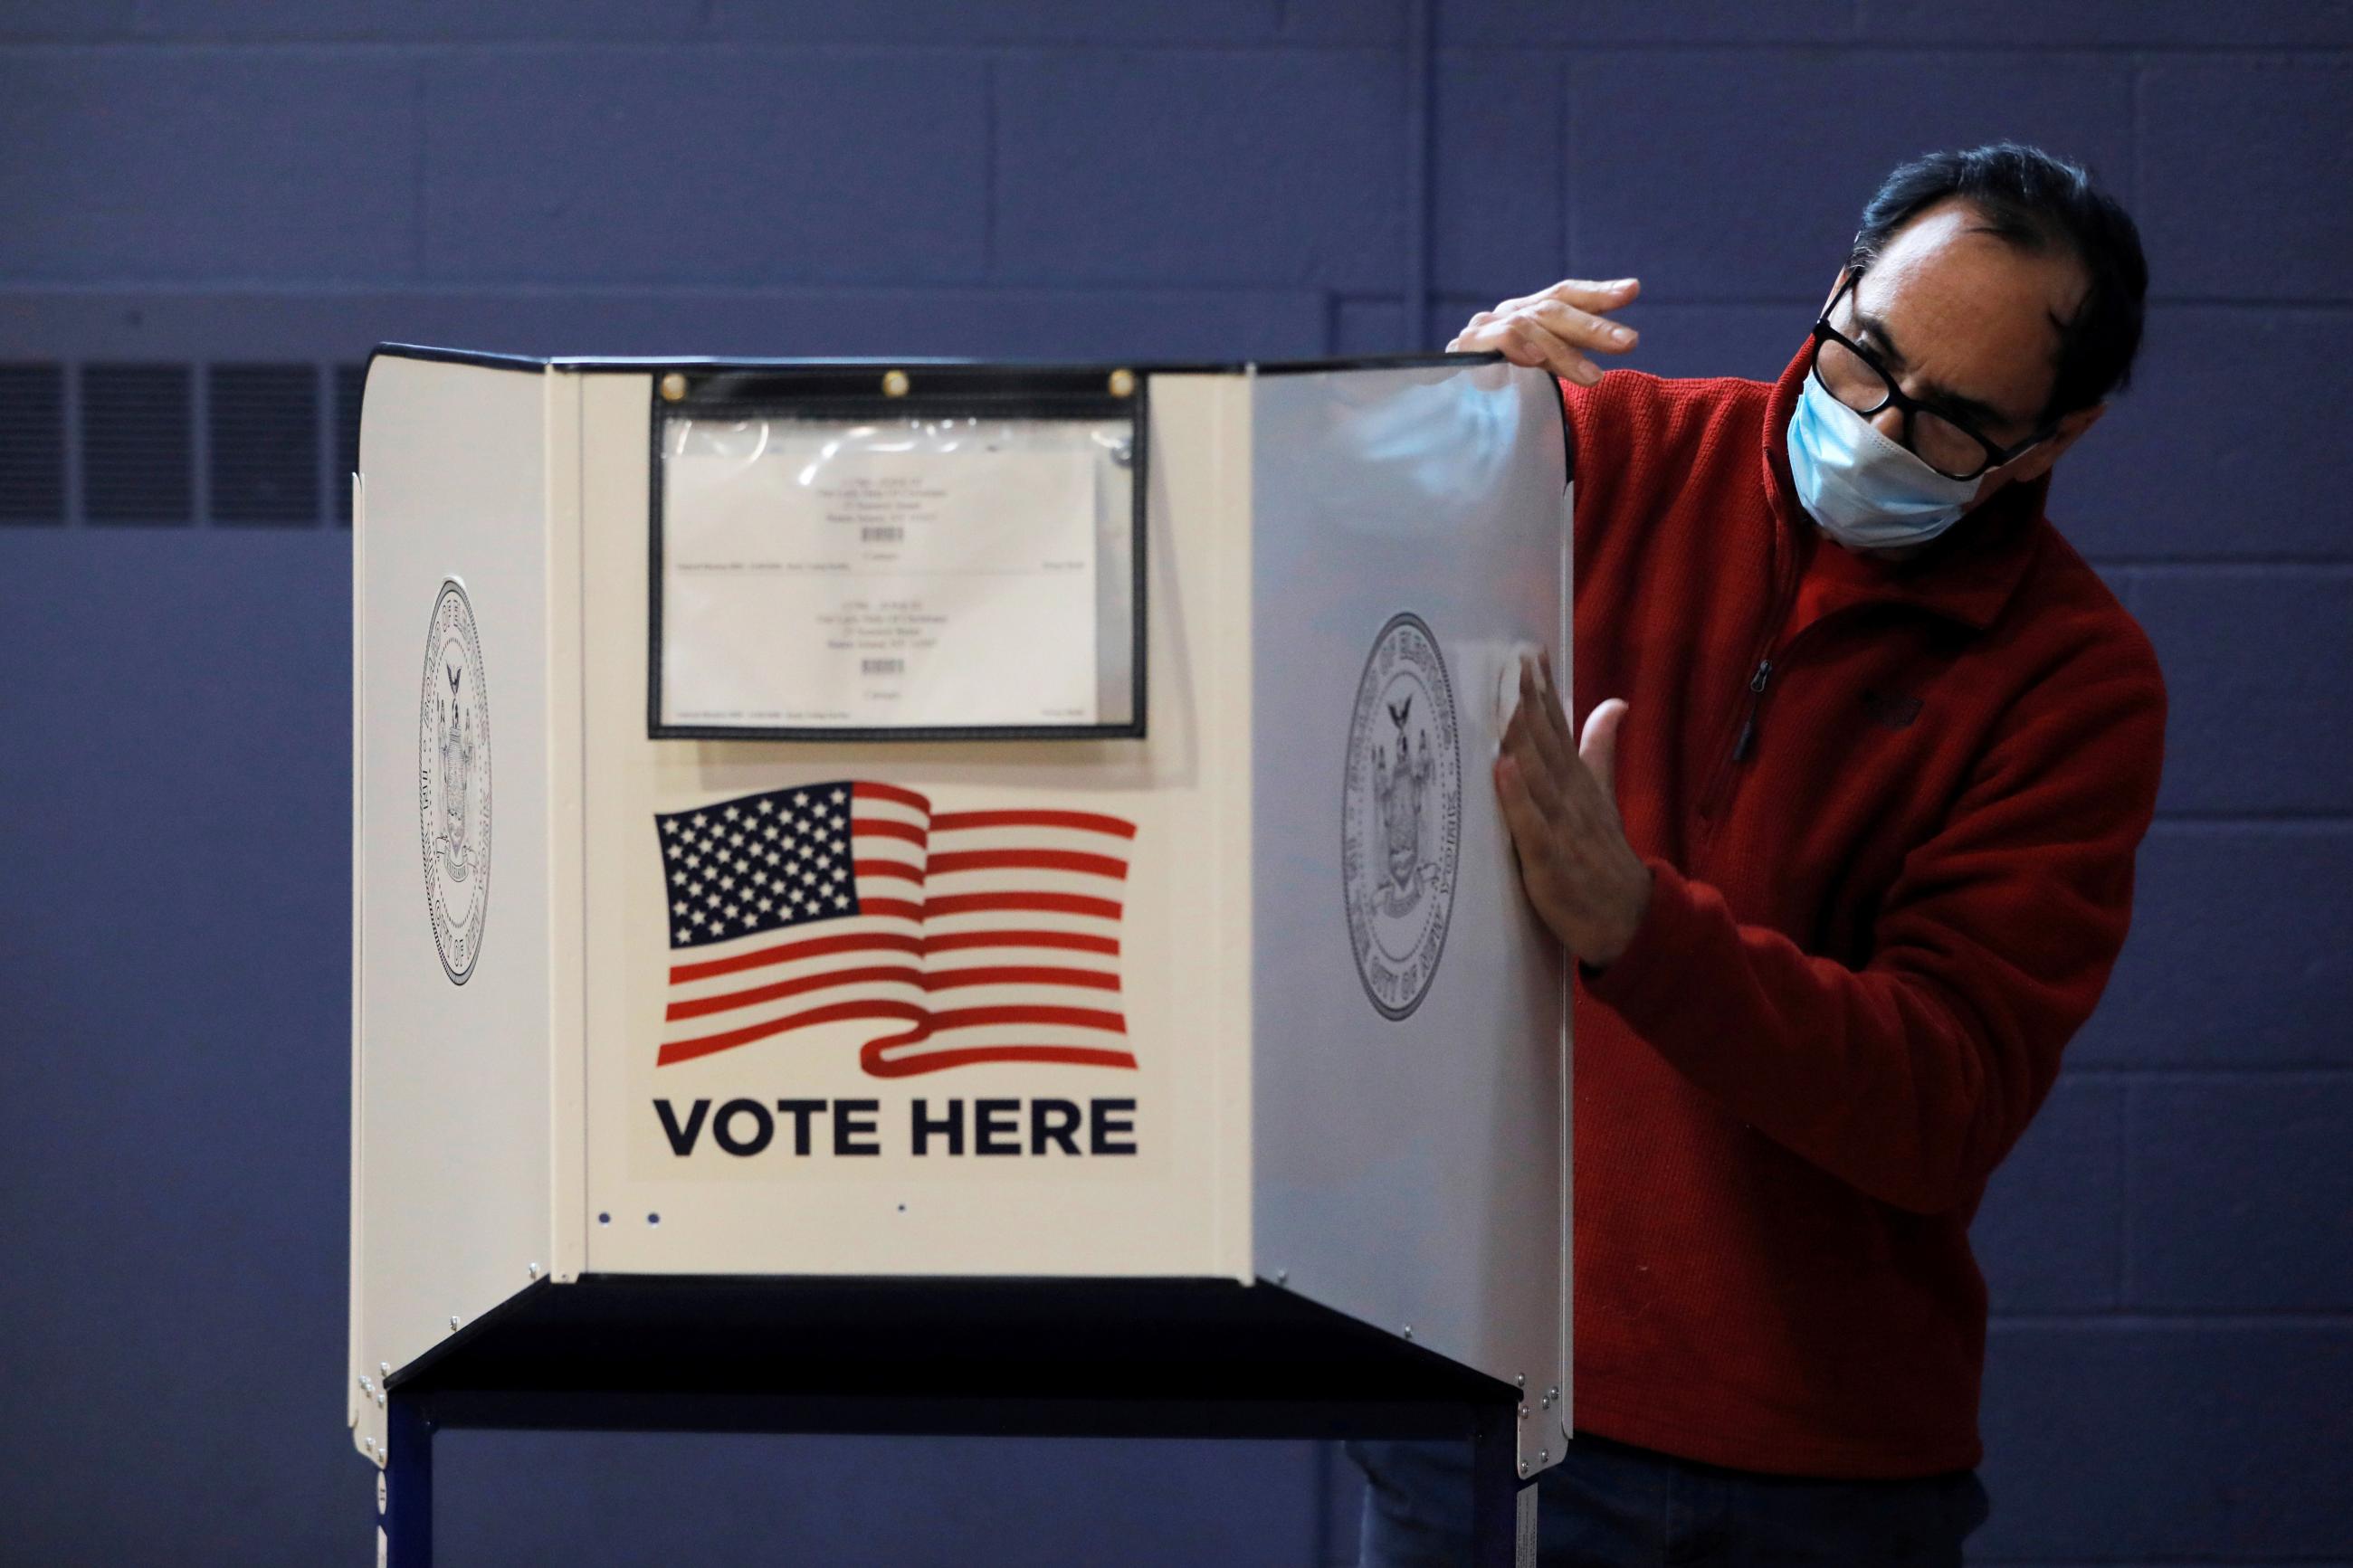 A man sanitizes a privacy booth to fight the spread of COVID-19 at a polling station in New York City, United States, on October 25, 2020. REUTERS/Andrew Kelly